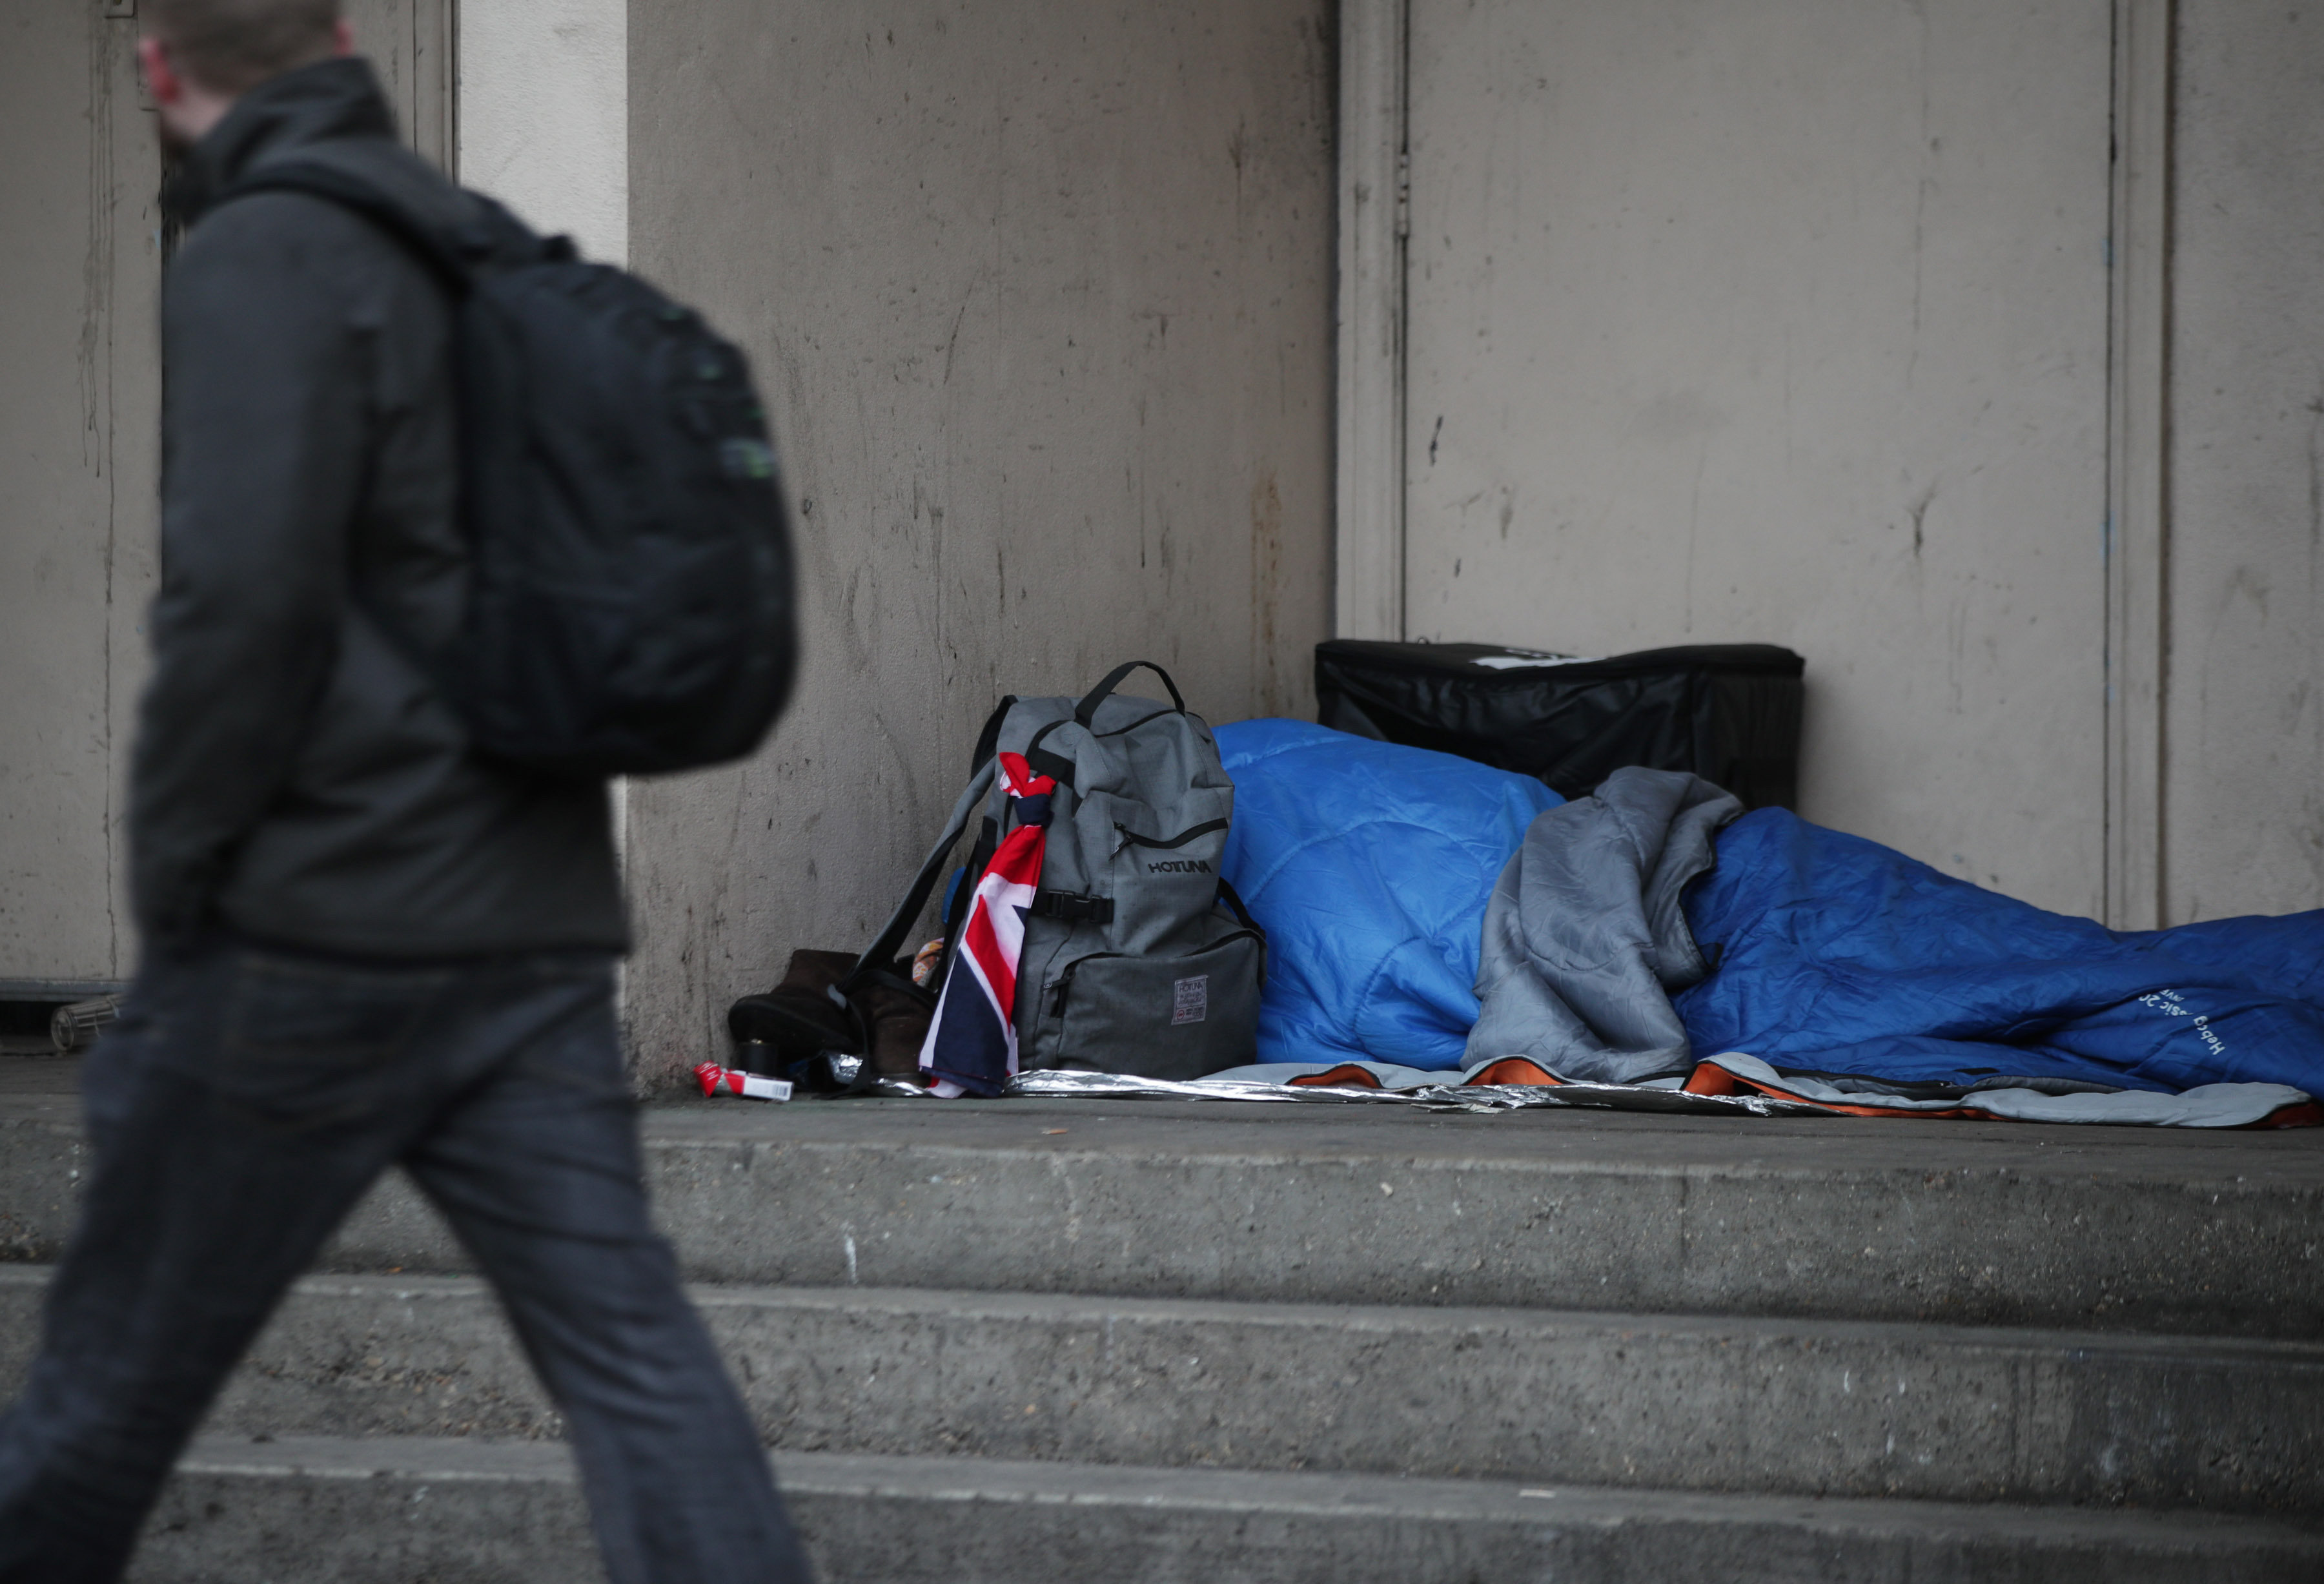 <strong>Emergency shelters for rough sleepers will now open their doors on the first day of freezing weather&nbsp;</strong>